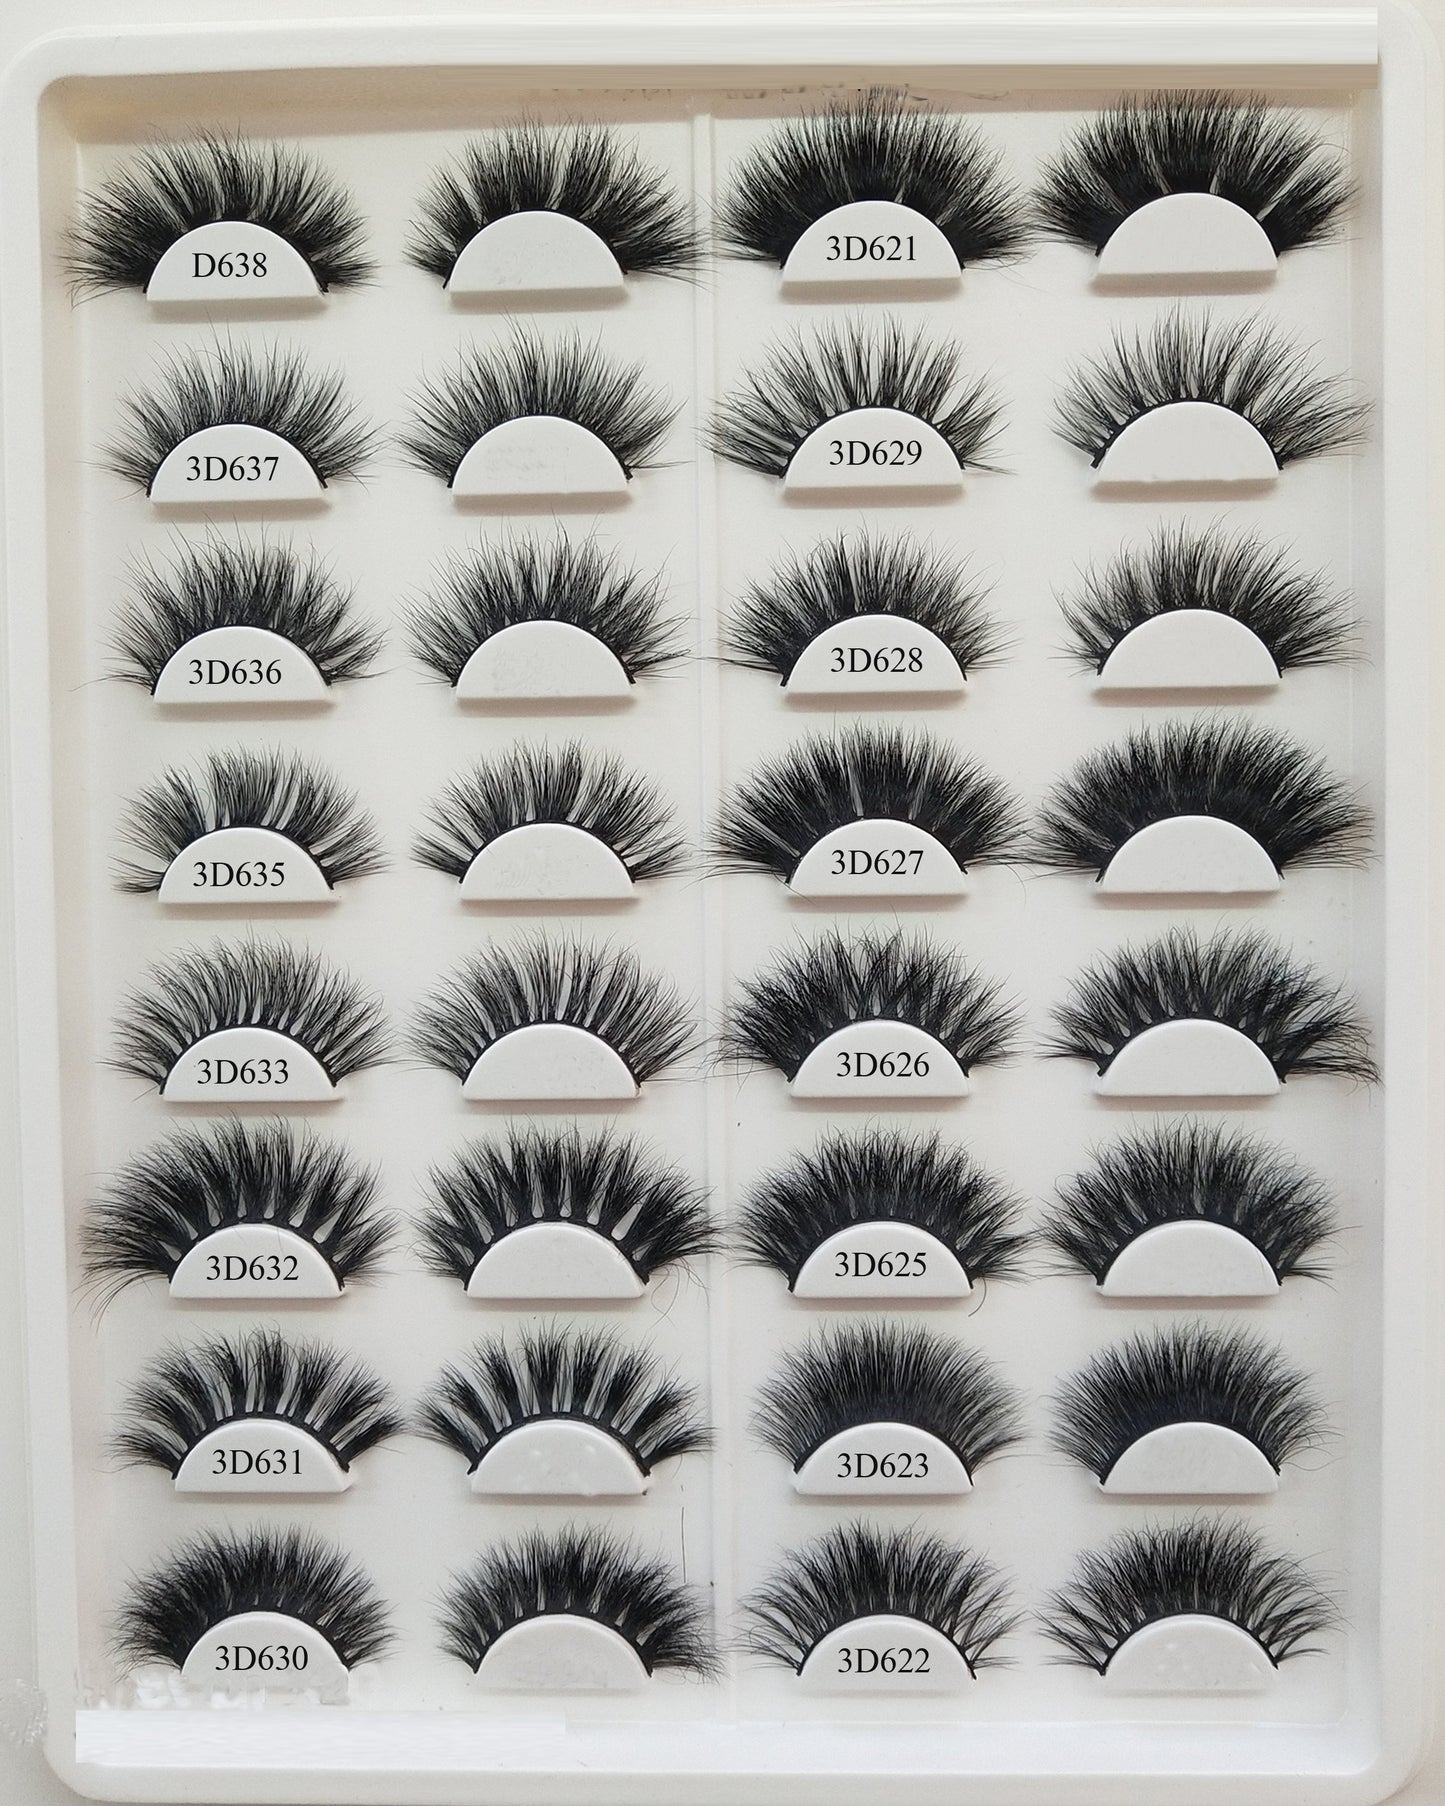 High Quality Mink Lashes with Lashes Box Customized With Your Logo Free Shipping